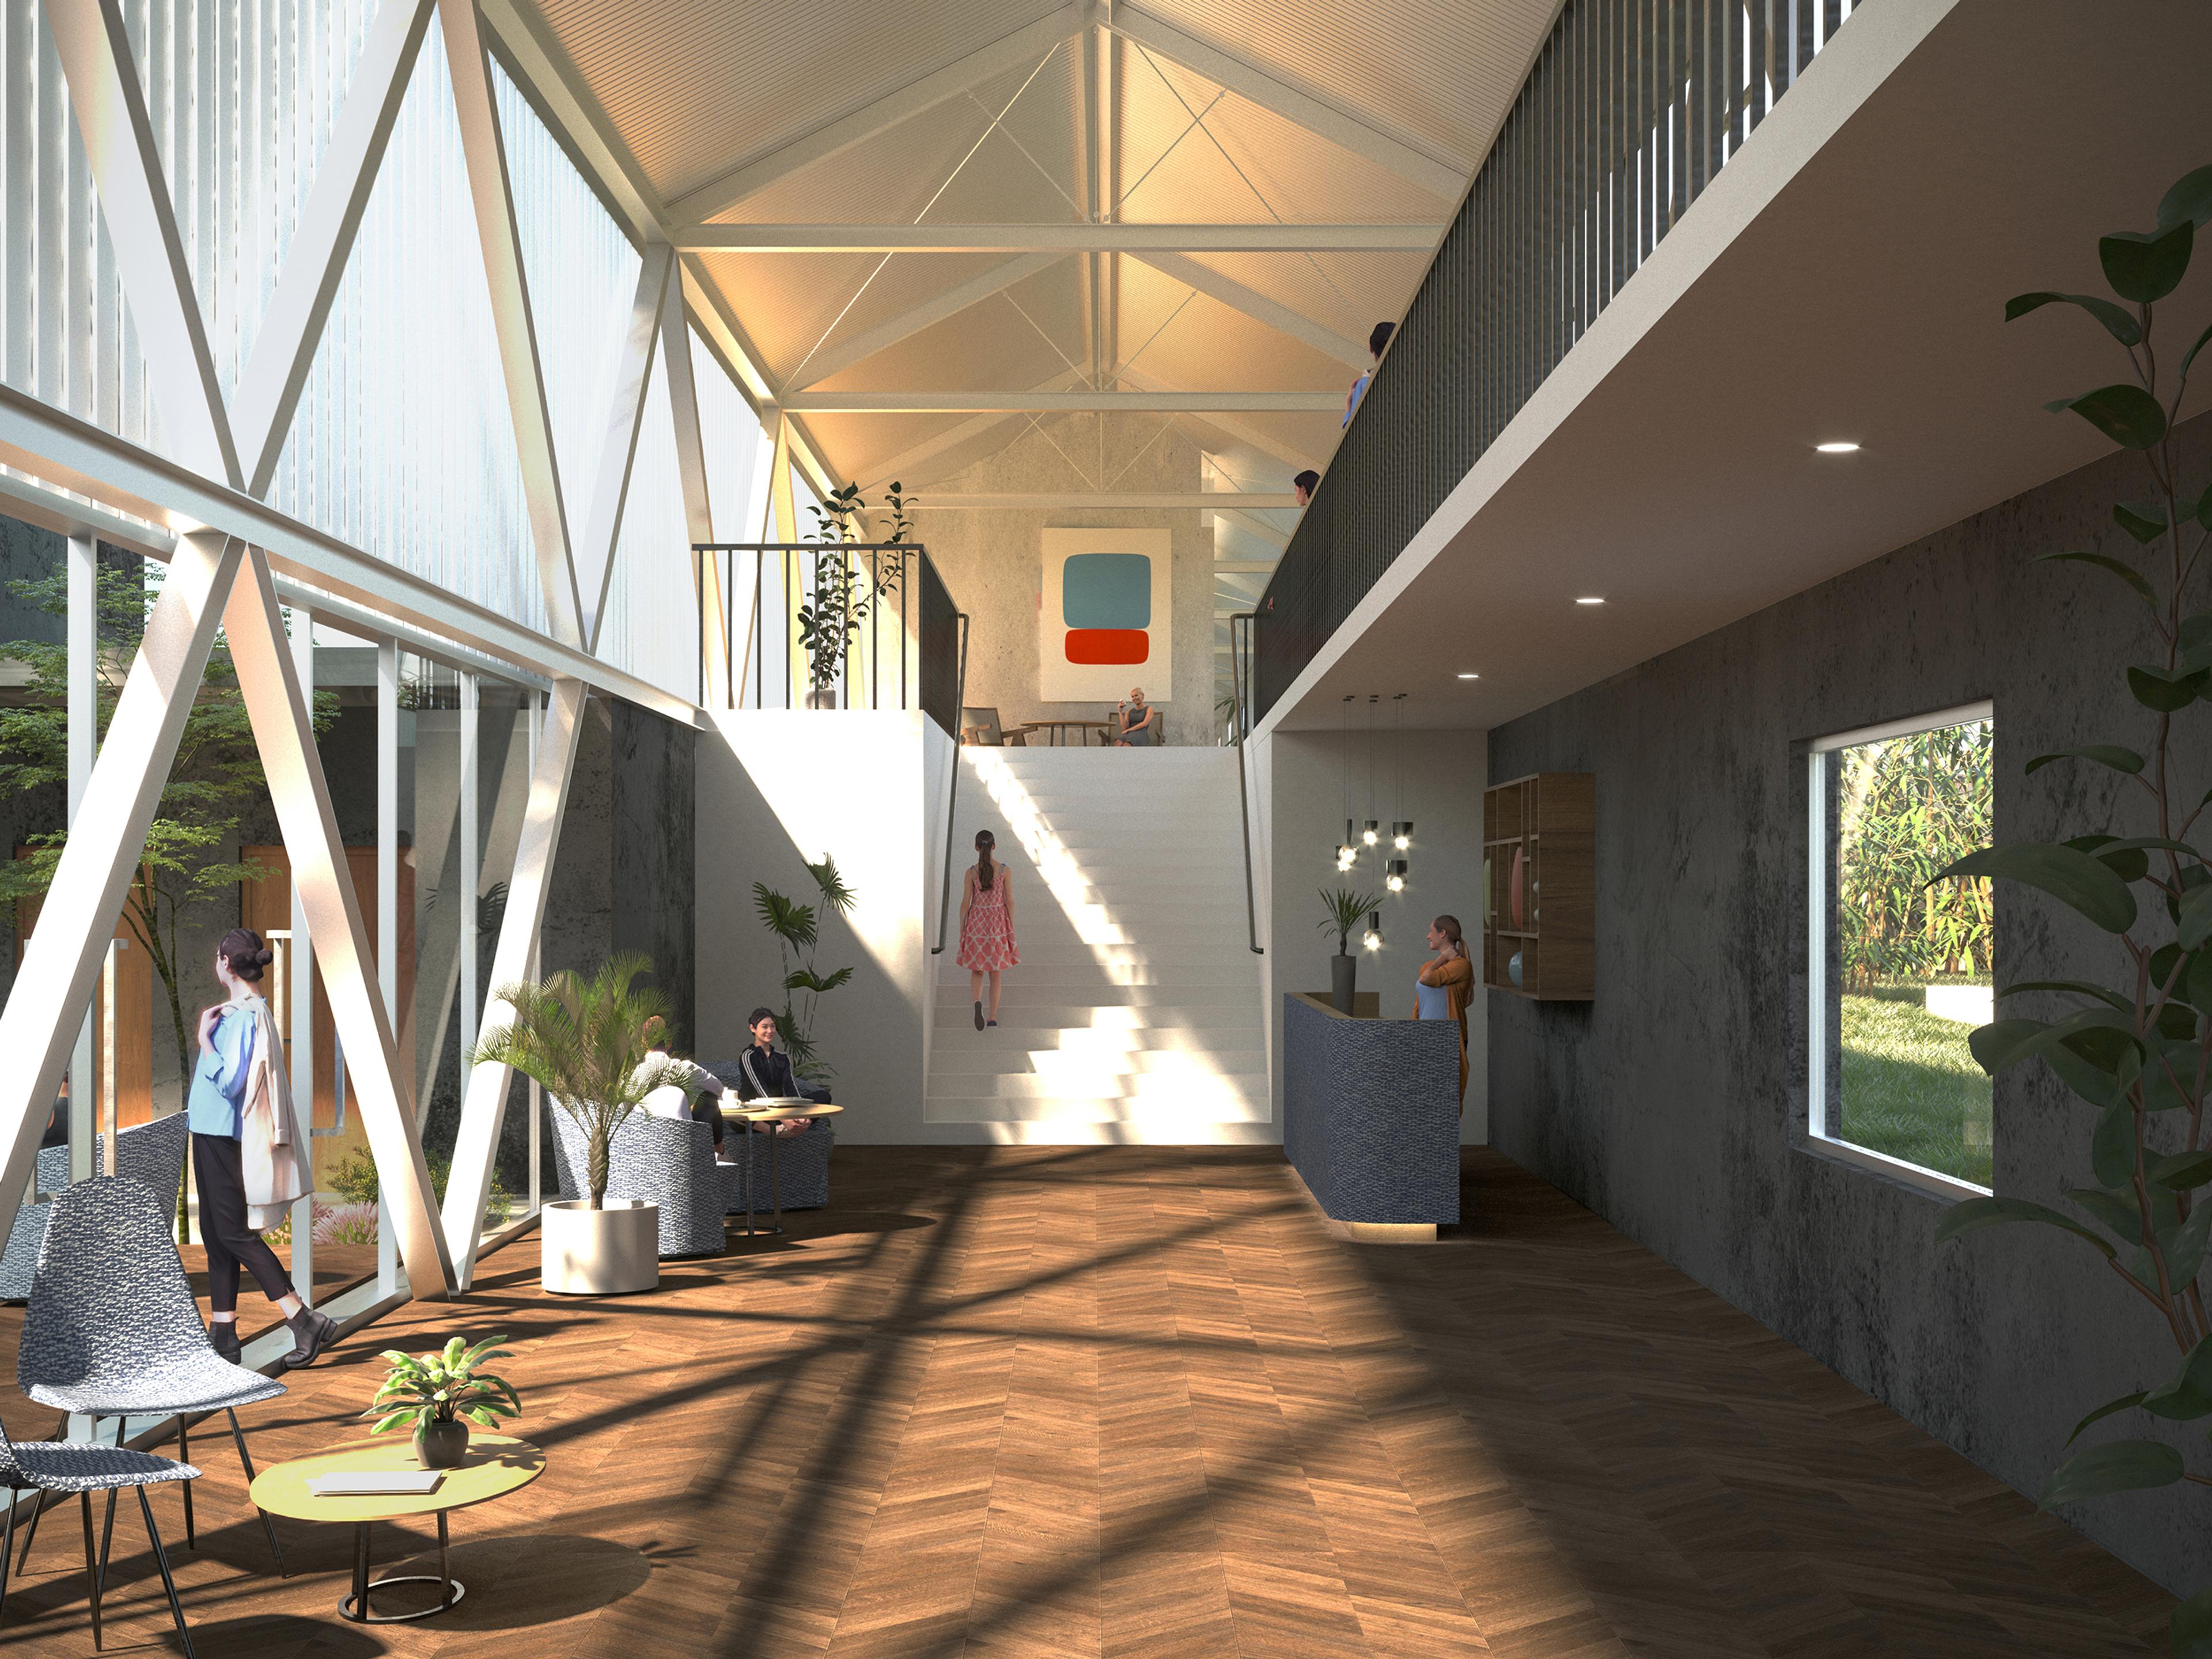 architectural rendering of interior of modern structure